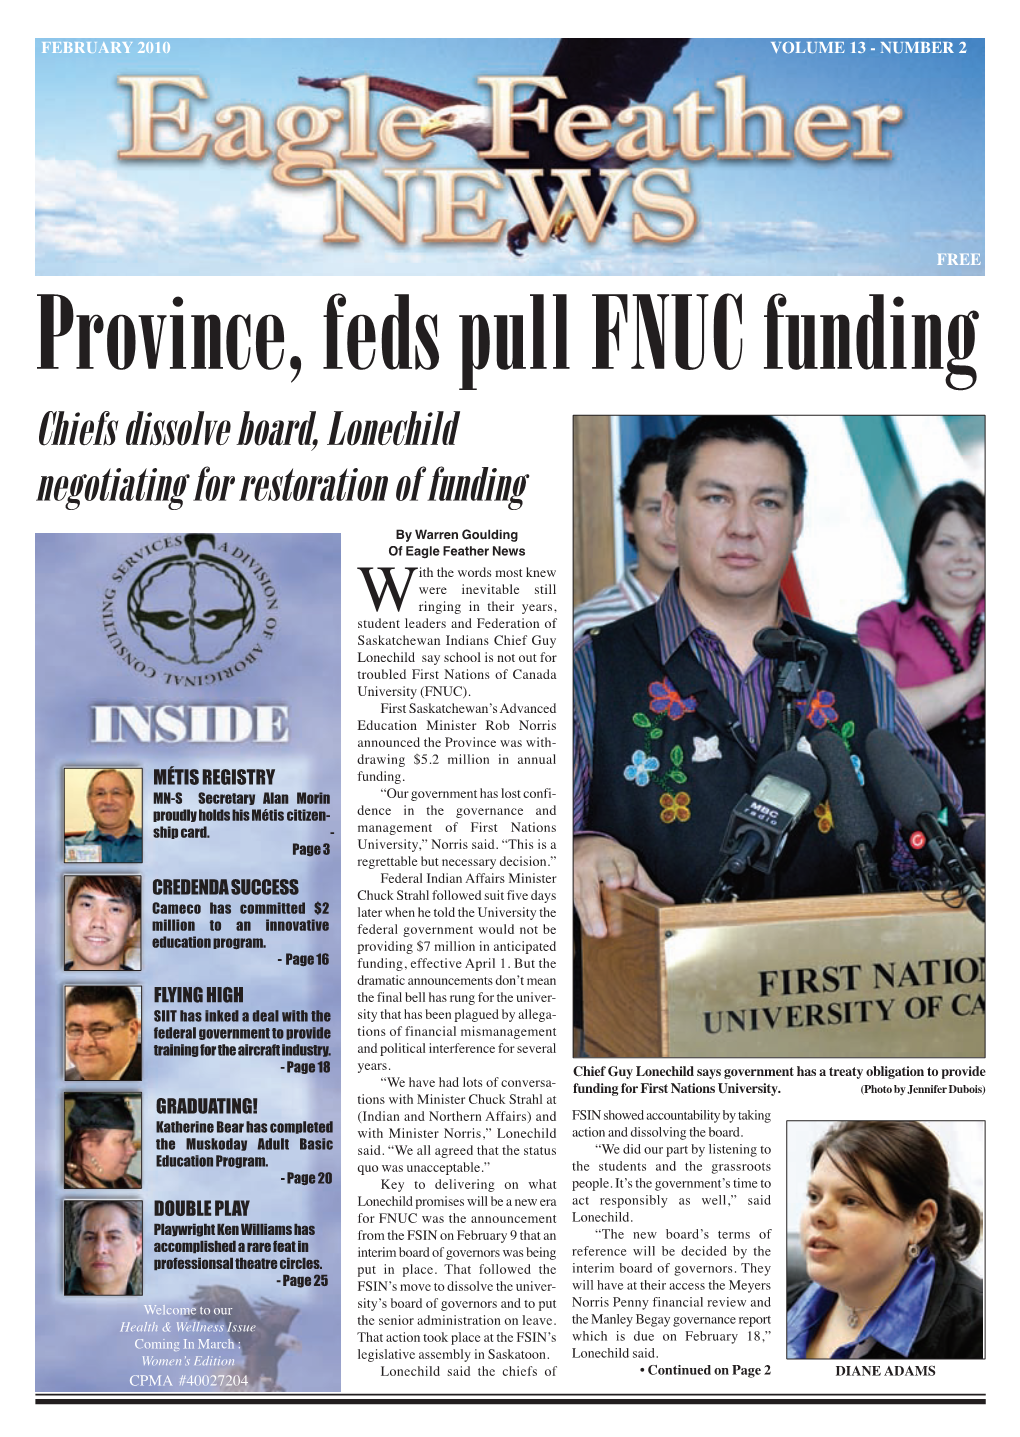 Chiefs Dissolve Board, Lonechild Negotiating for Restoration of Funding